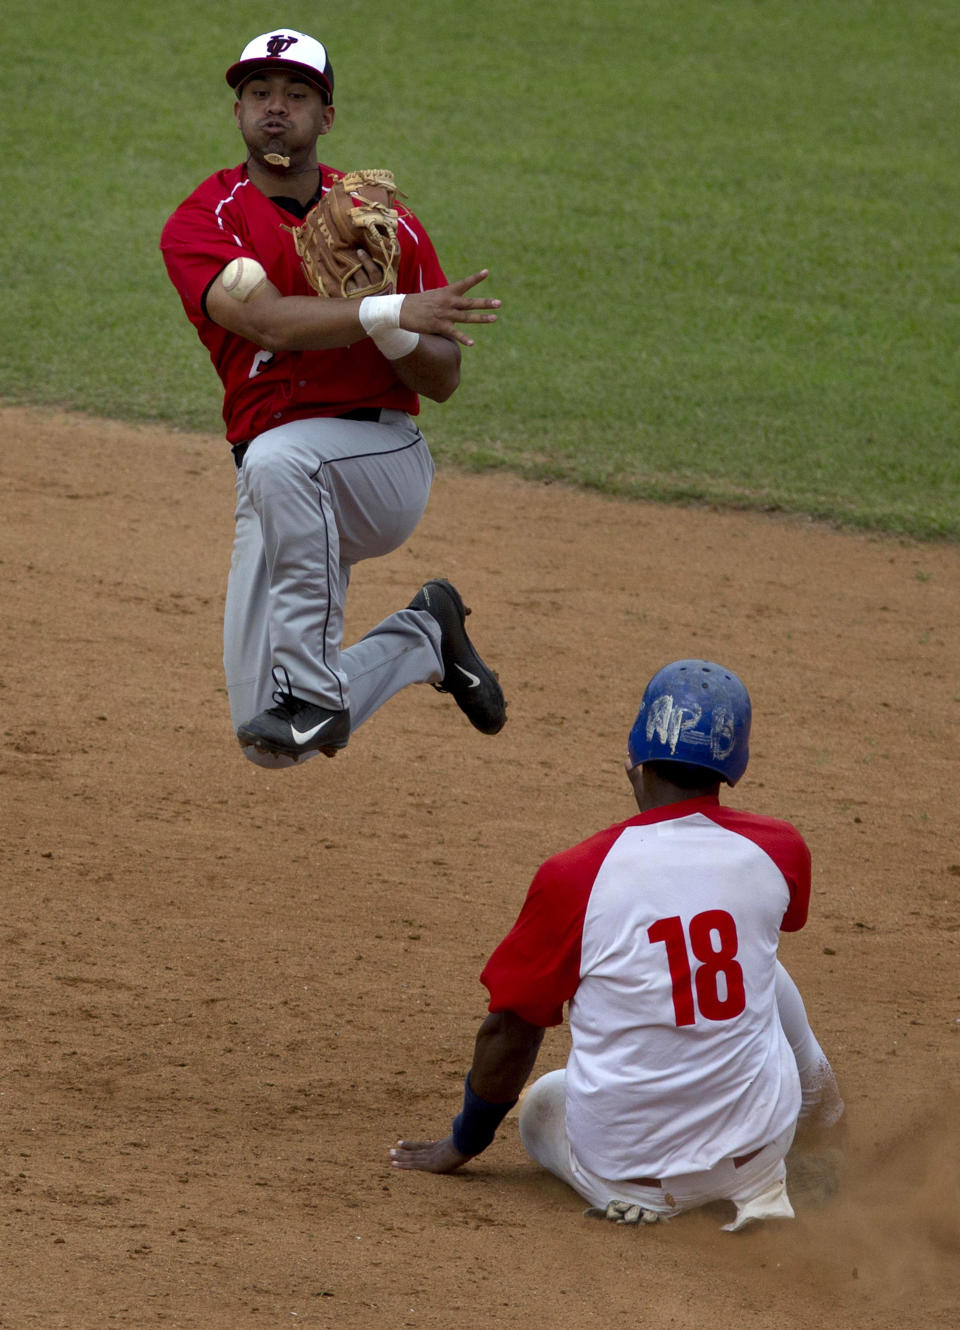 A player from the University of Tampa, left, outs a player from a Cuban youth team at second and throws to first during an exhibition game in Havana, Cuba, Wednesday, Jan. 15, 2014. Cultural exchanges between Cuba and the U.S. have become increasingly common in recent years. President Barack Obama's administration has restored so-called people-to-people tours, resulting in tens of thousands of Americans visiting the island each year legally. (AP Photo/Ramon Espinosa)